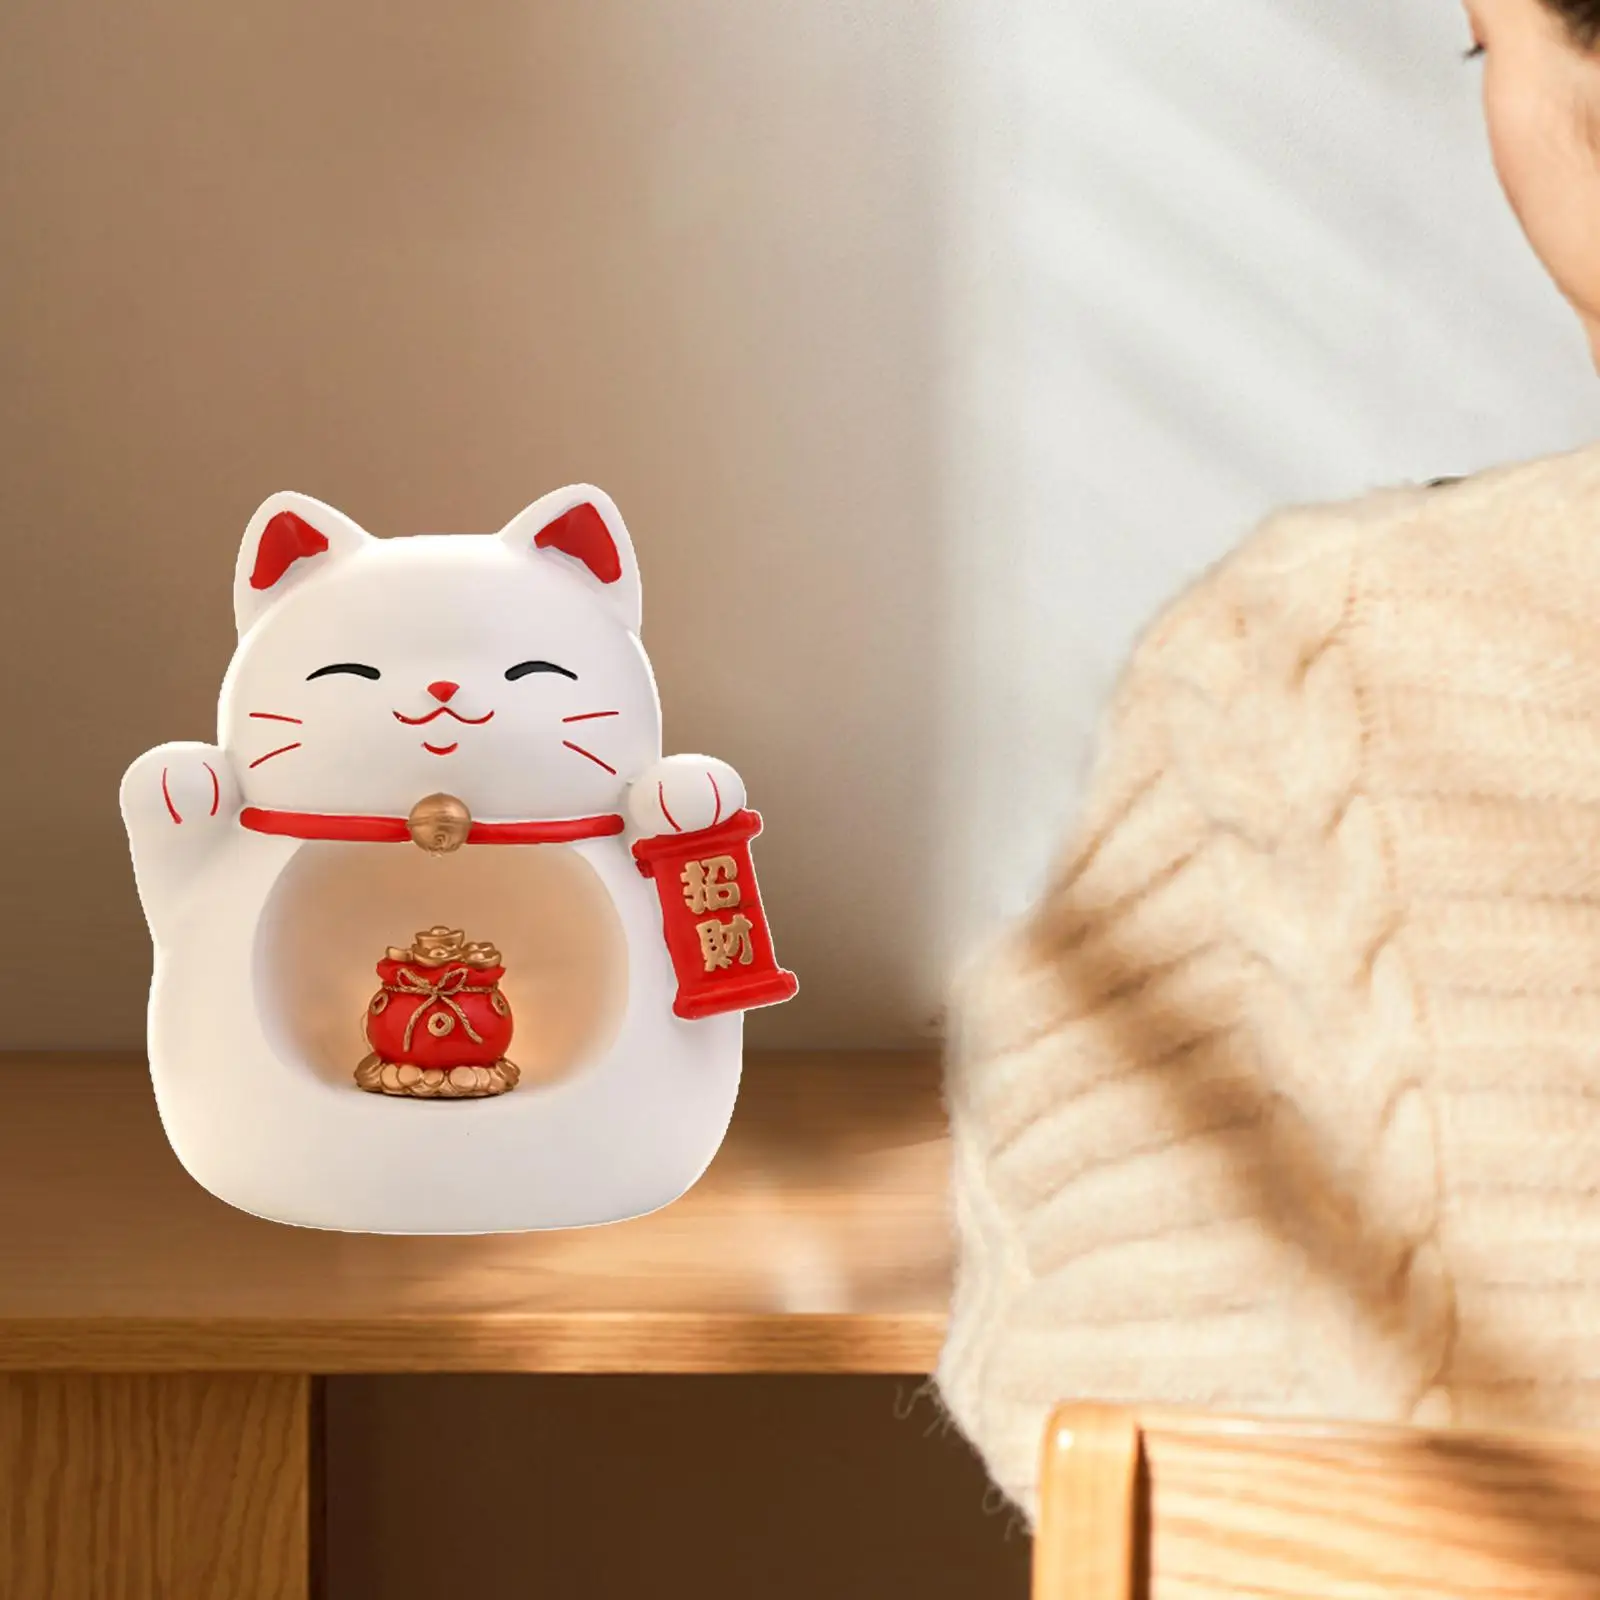 Statue Figurine Lucky Cats with Light Sculpture Animal Decor for Home Car Office Living Room Study Decor Ornament Resin Crafts